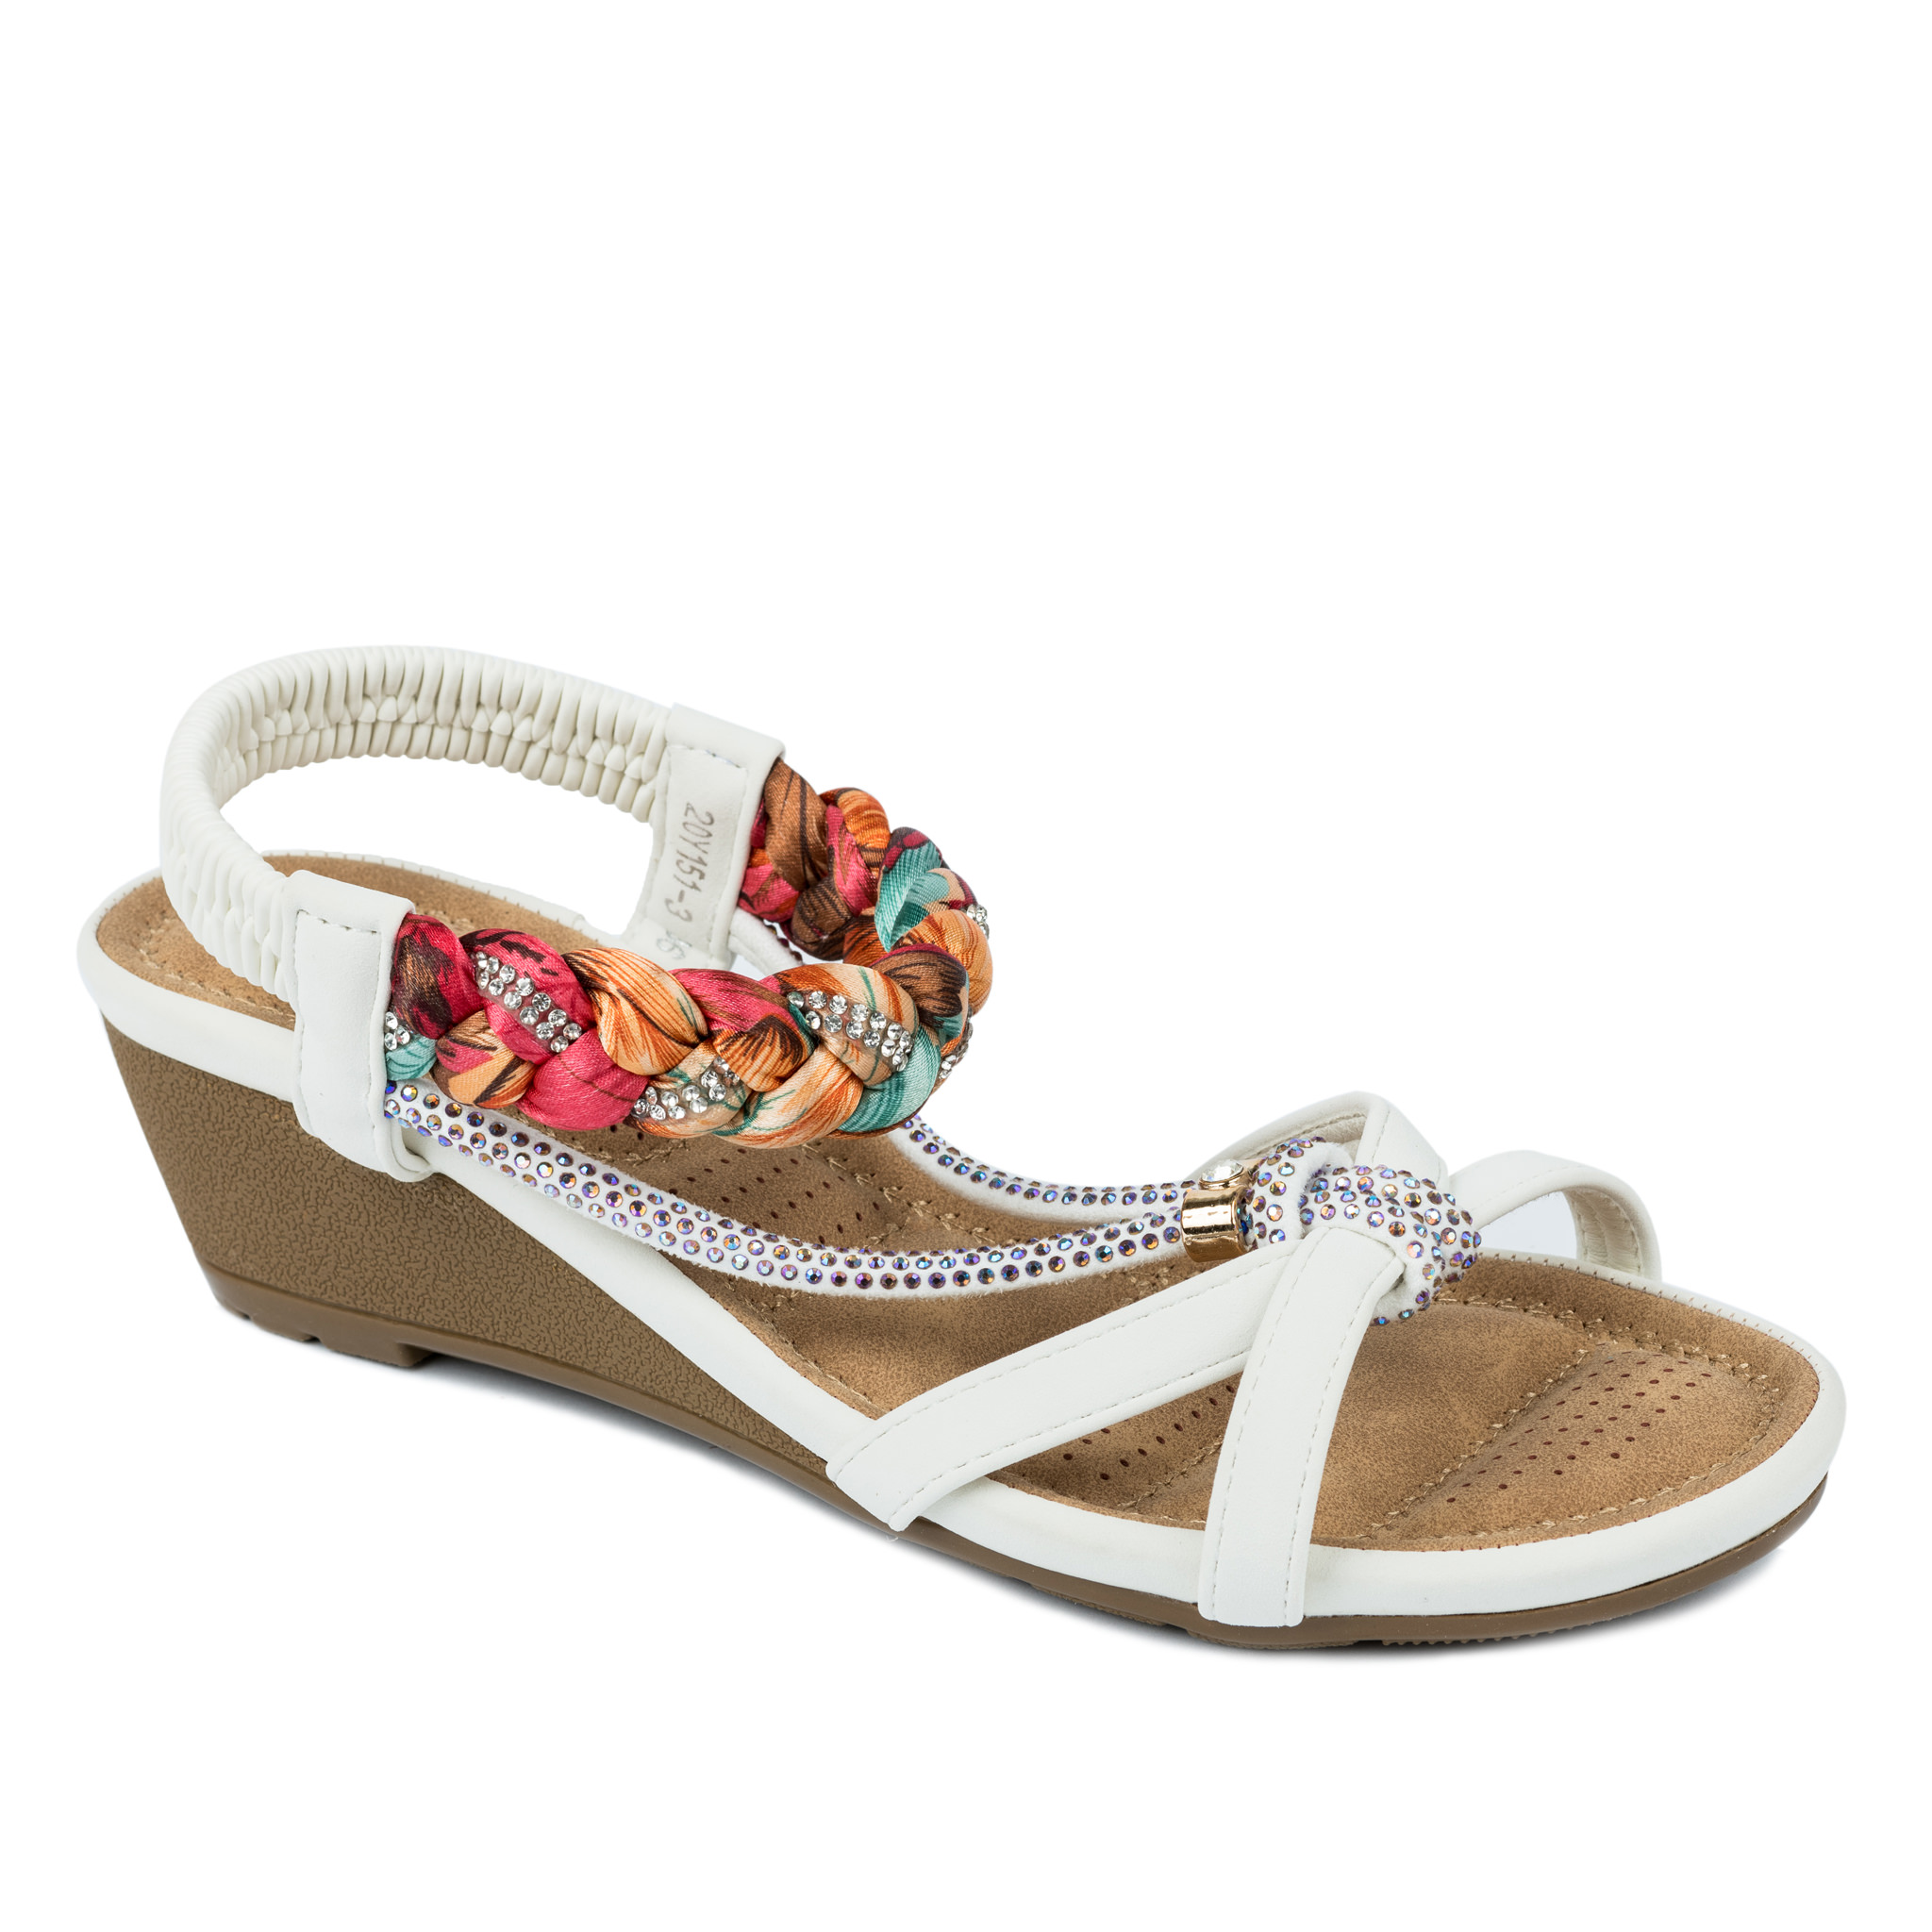 WEDGE SANDALS WITH BRAID - WHITE